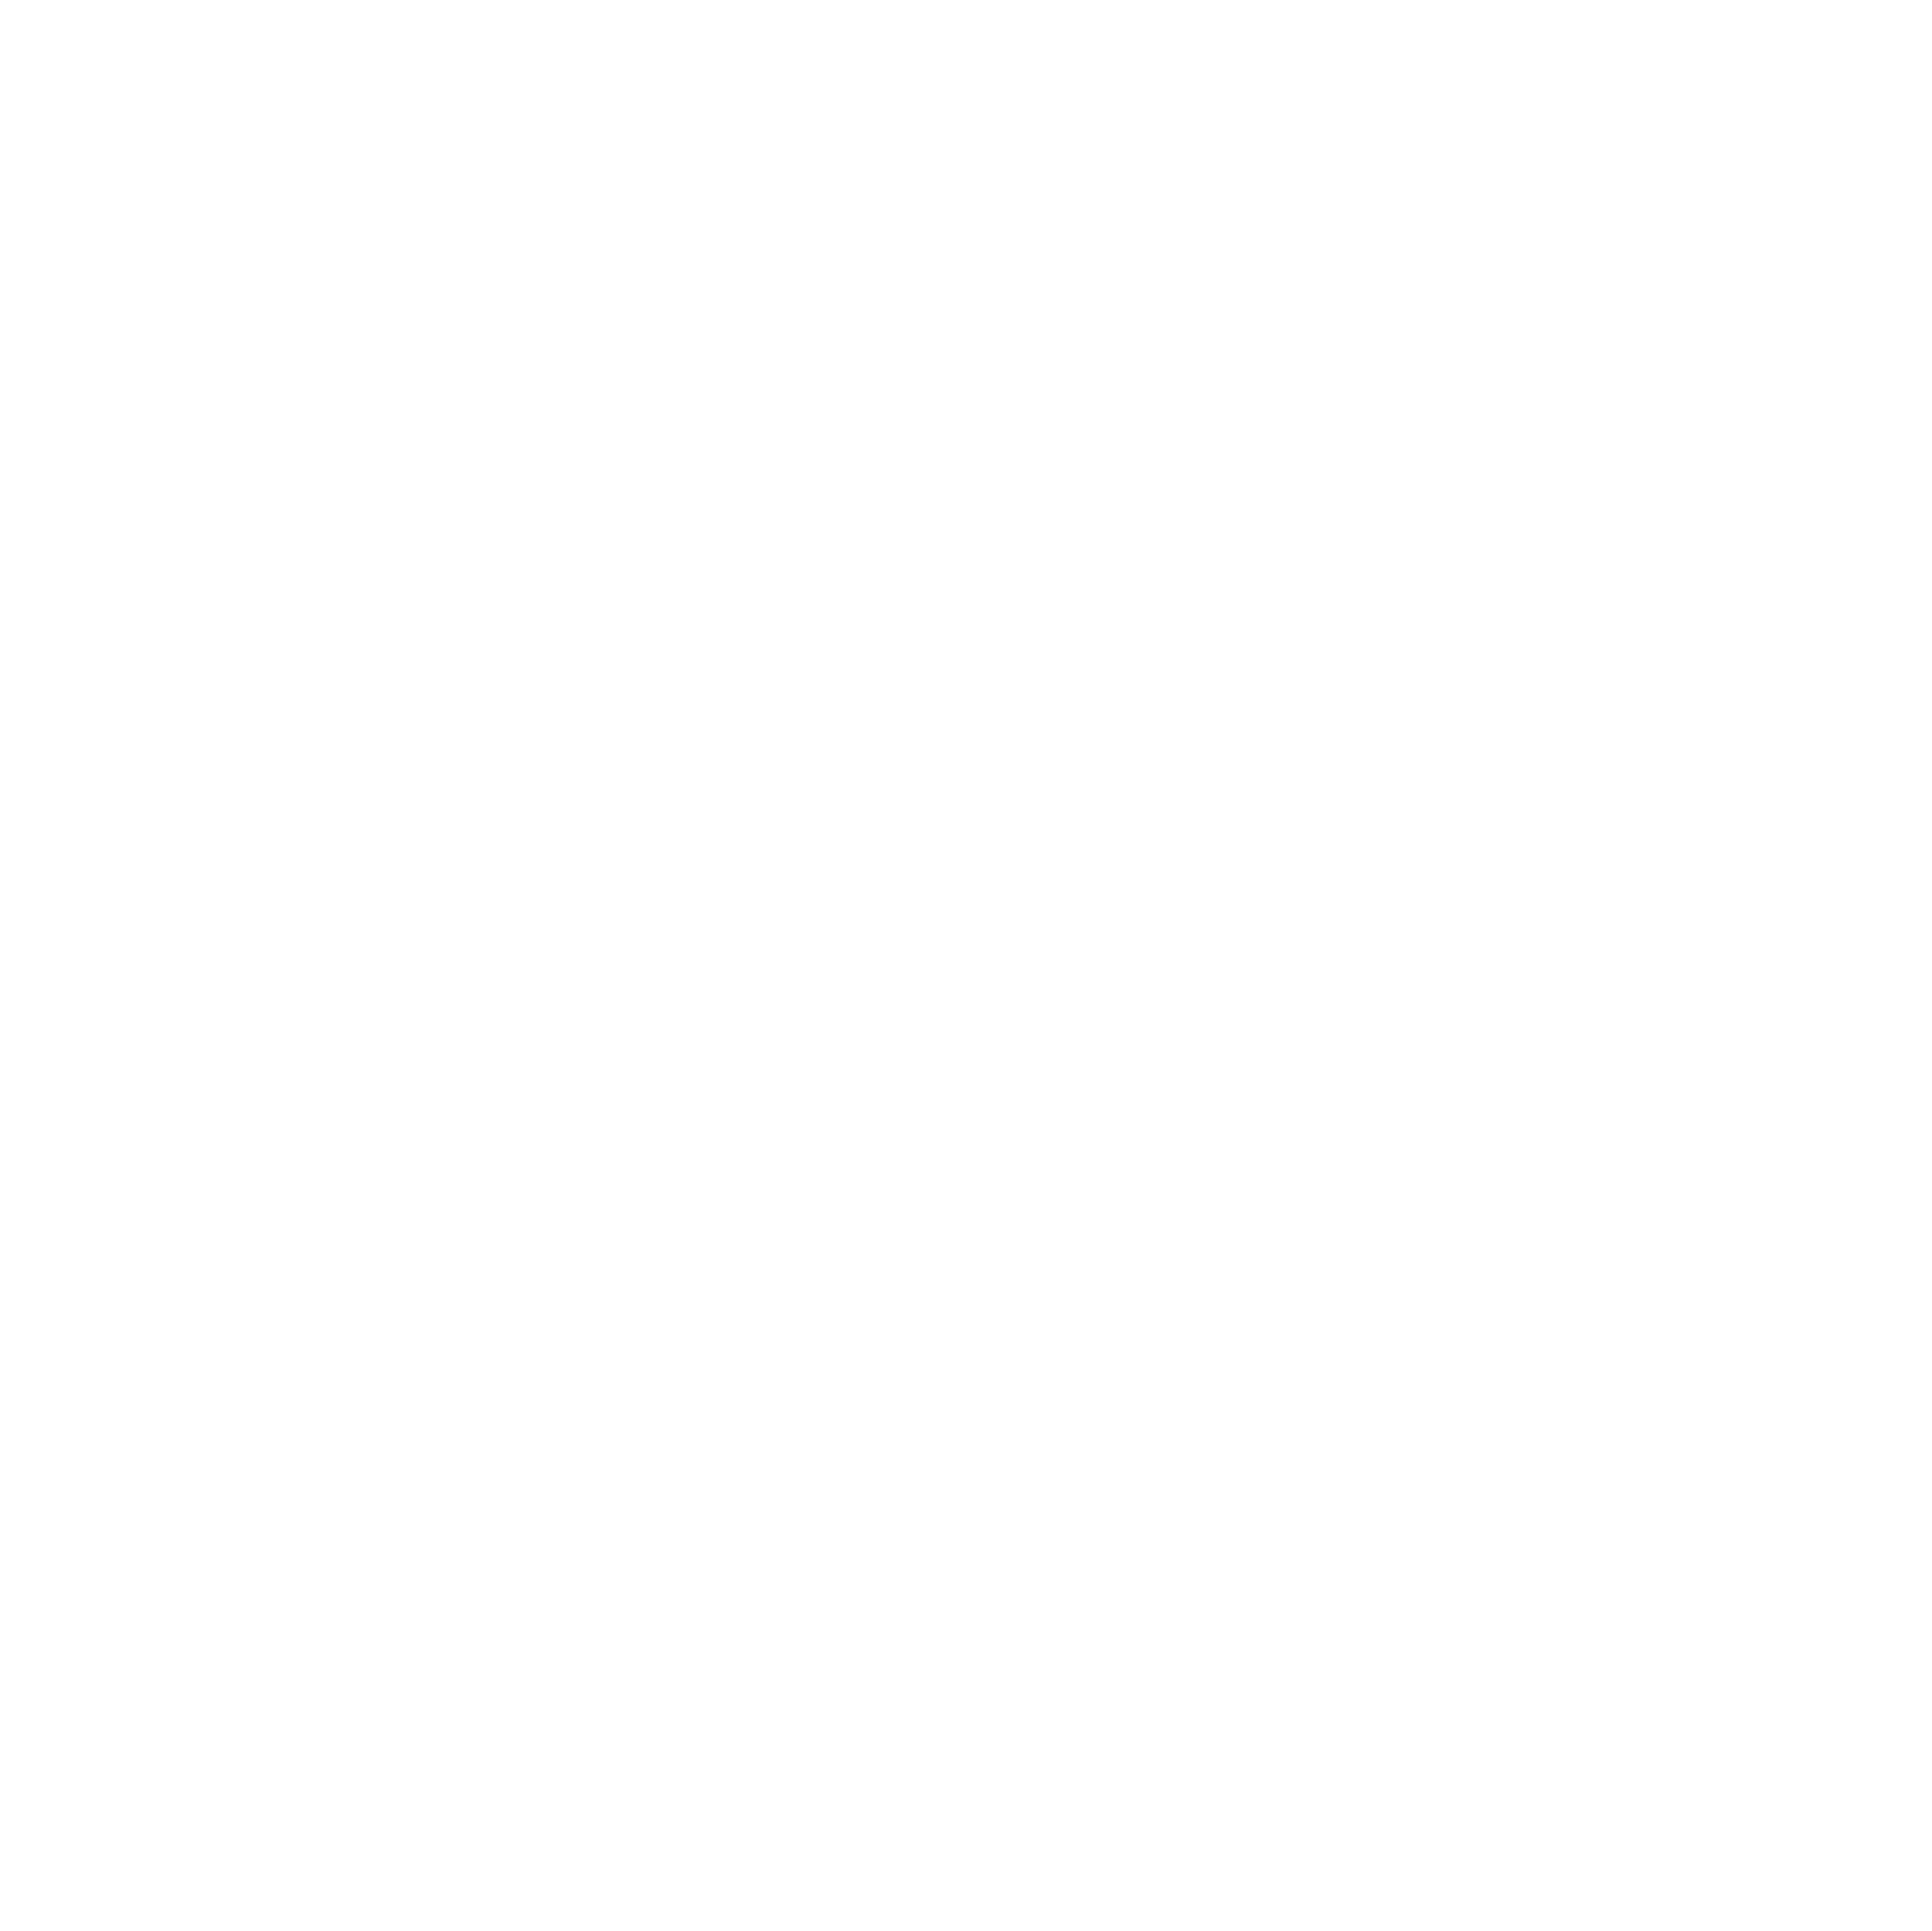 Nigerian Journal of Psychological Research